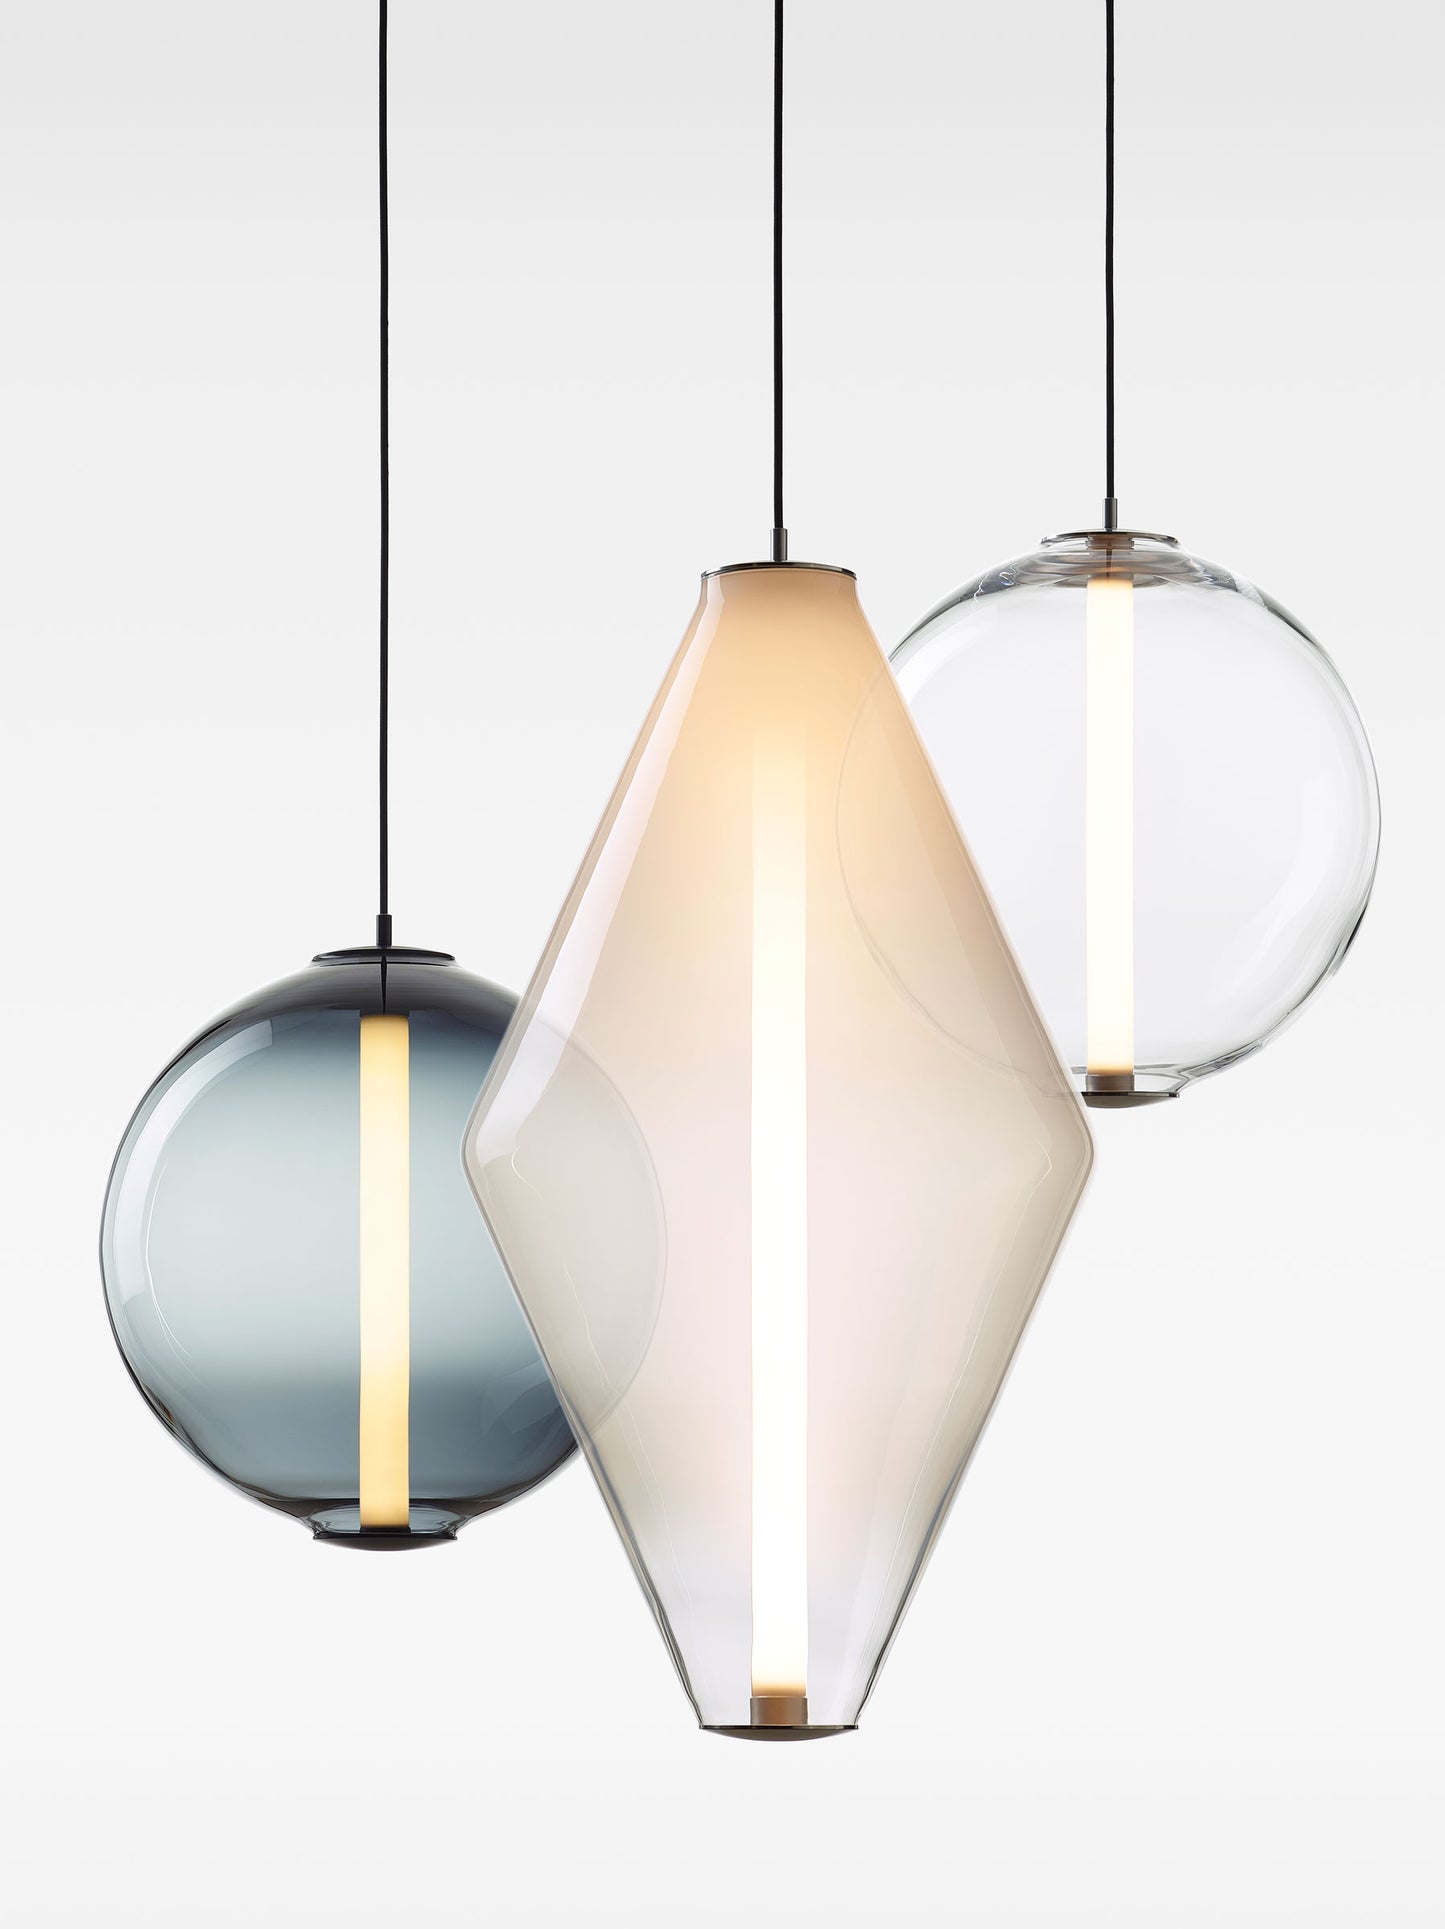 BOMMA - BUOY PENDANT DOUBLE CONE - from $4,798.00